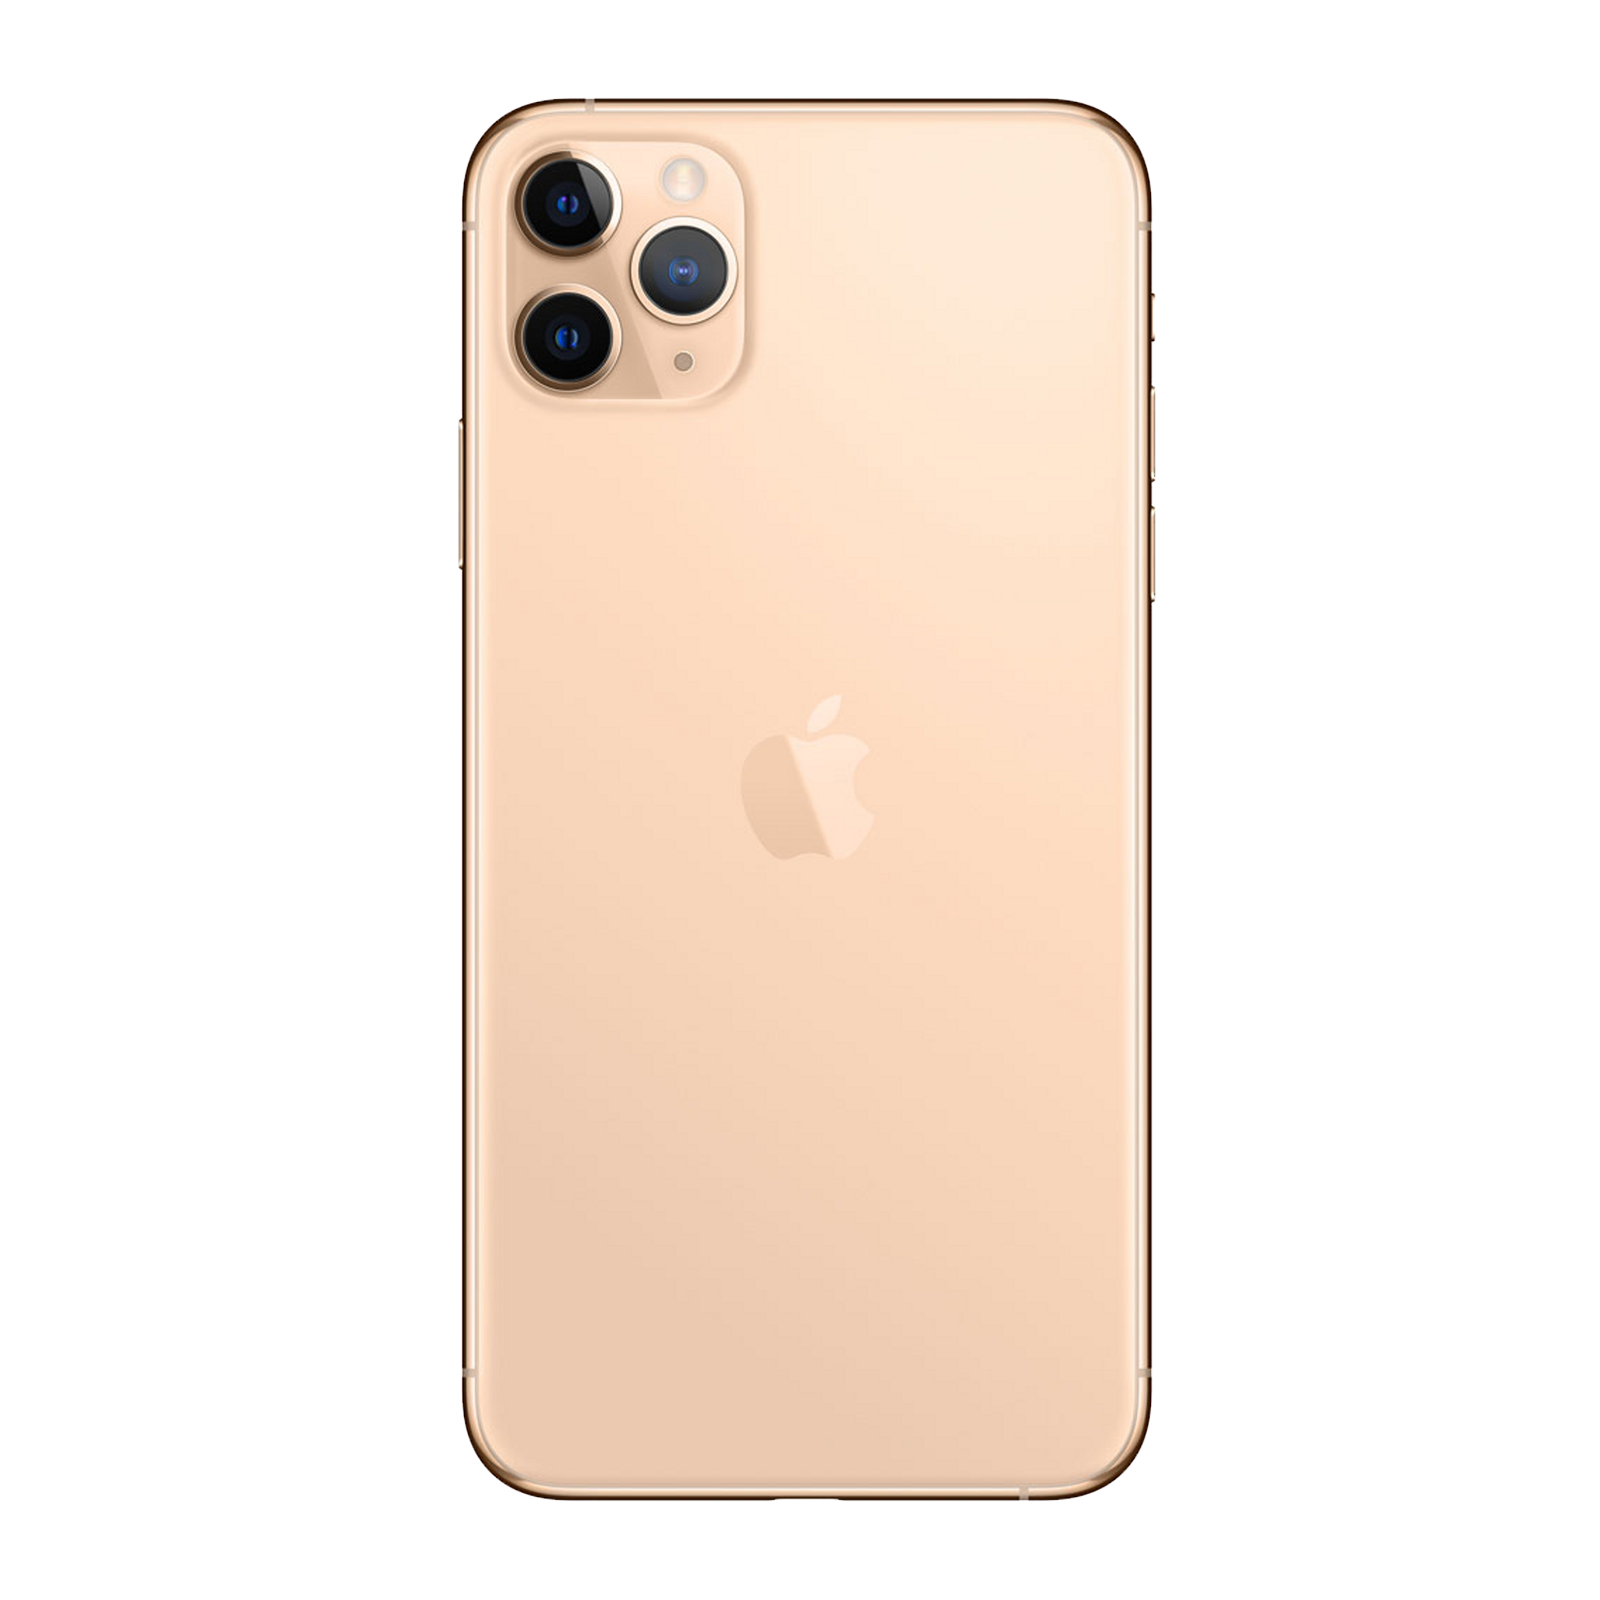 Apple iPhone 11 Pro 64GB Gold Good - T-Mobile